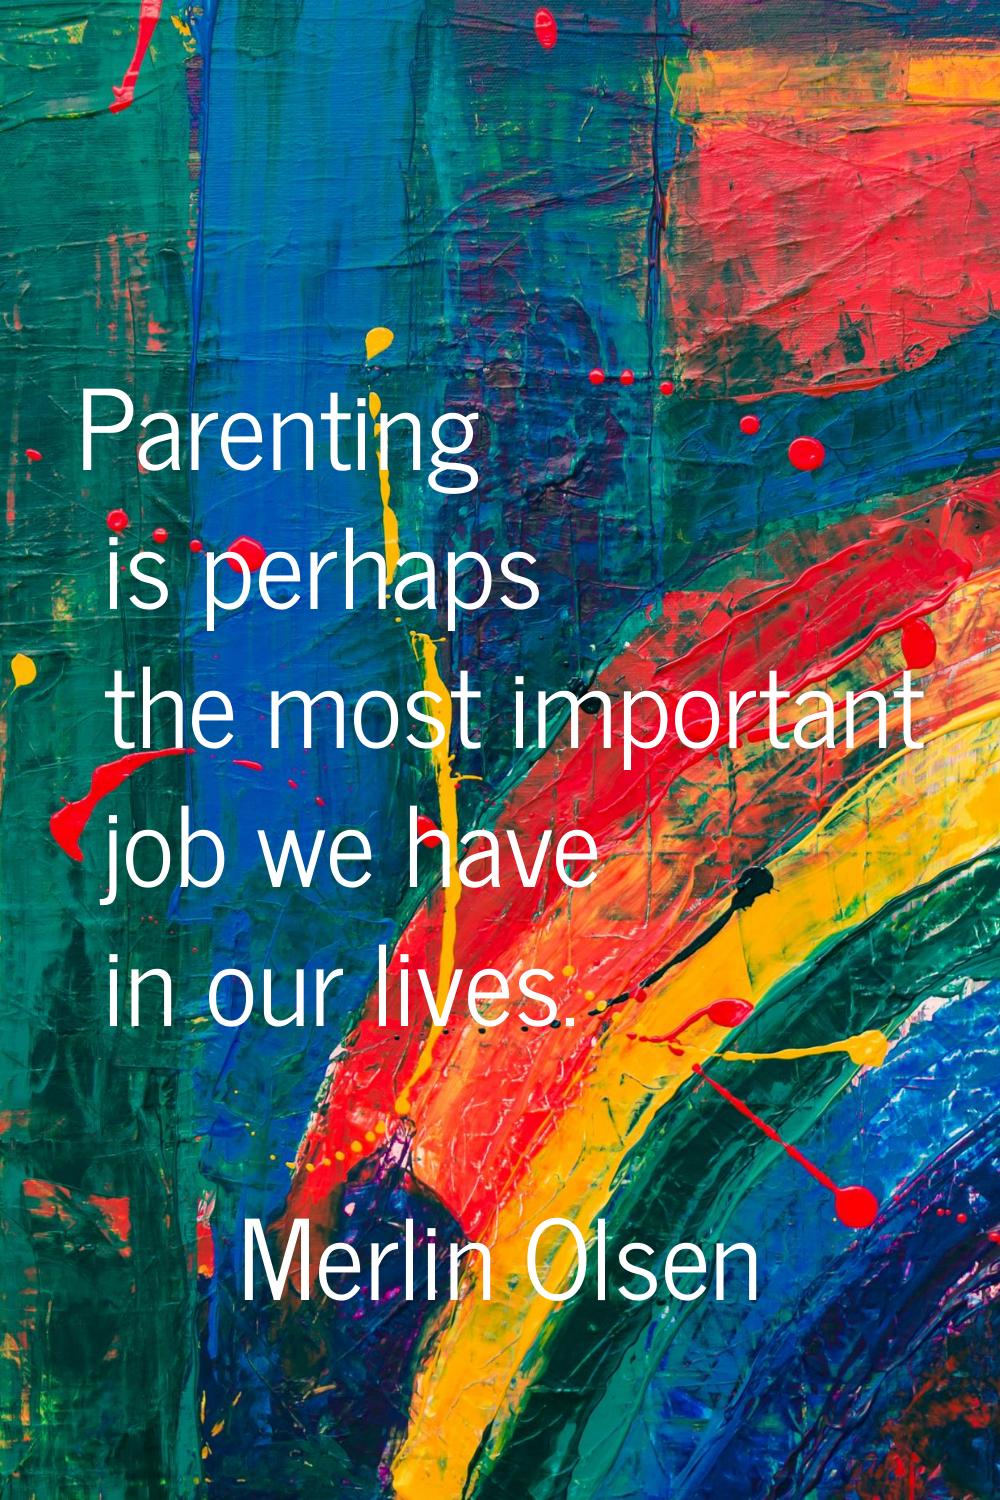 Parenting is perhaps the most important job we have in our lives.